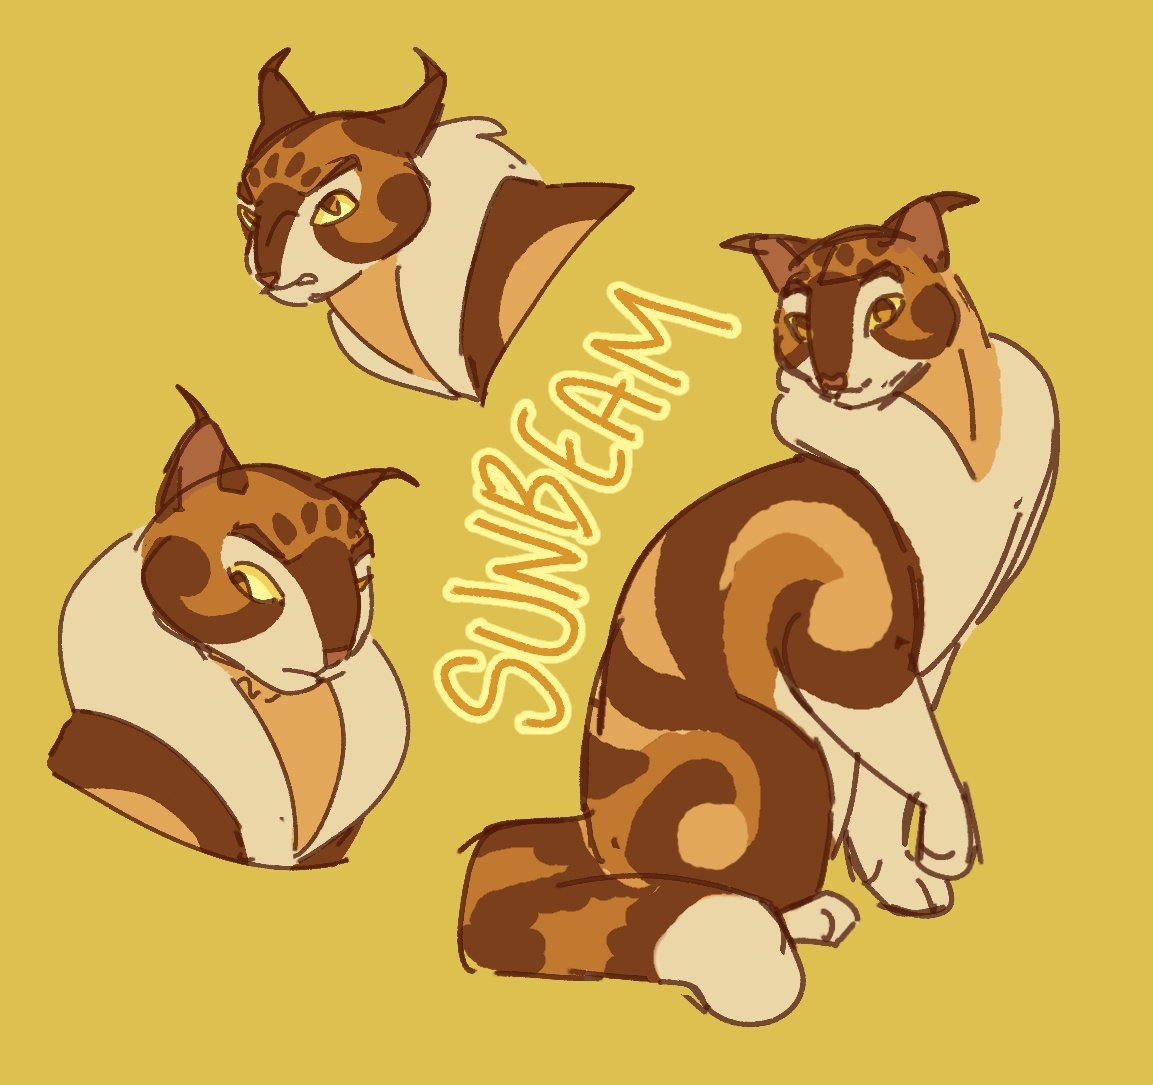 ☀️🌟 sunbeam concept design... i want to experiment with other ideas but this is one 

[#sunbeam #warriorcats]